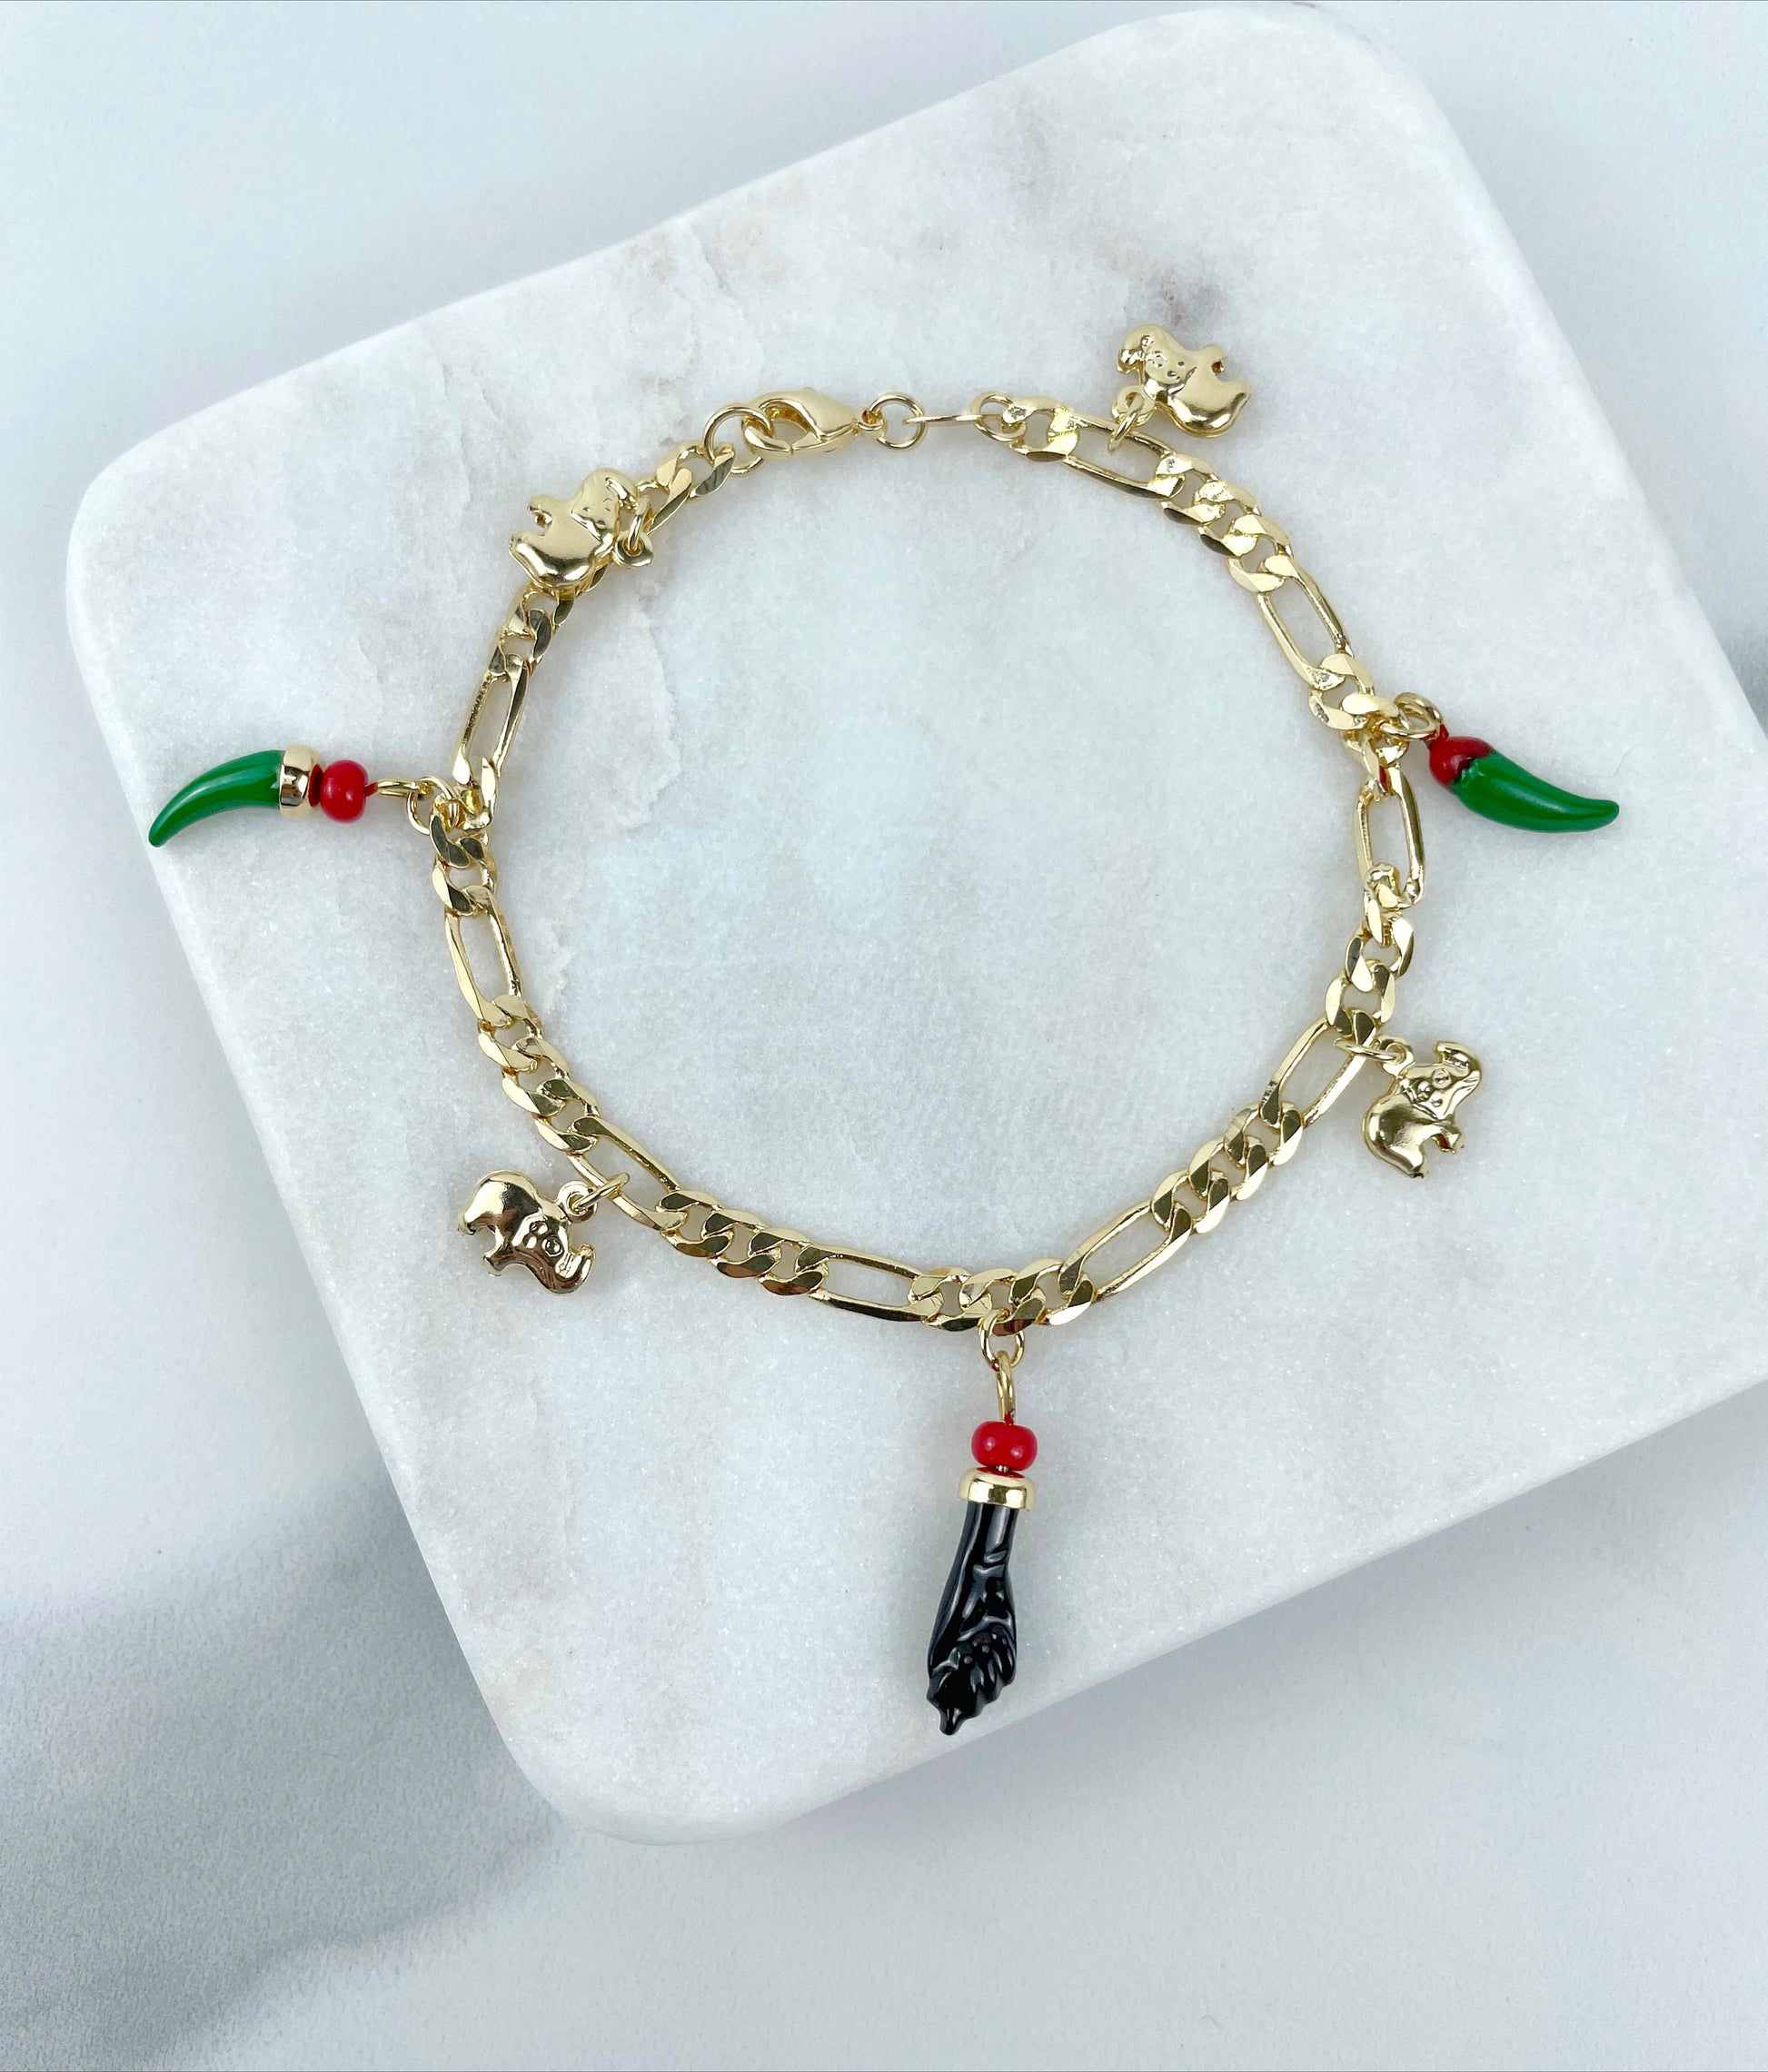 18k Gold Filled 4mm Mariner Link, Elephants, Red Green Chili, Figa Hand Charms Bracelet, Lucky & Protection, Wholesale Jewelry Supplies